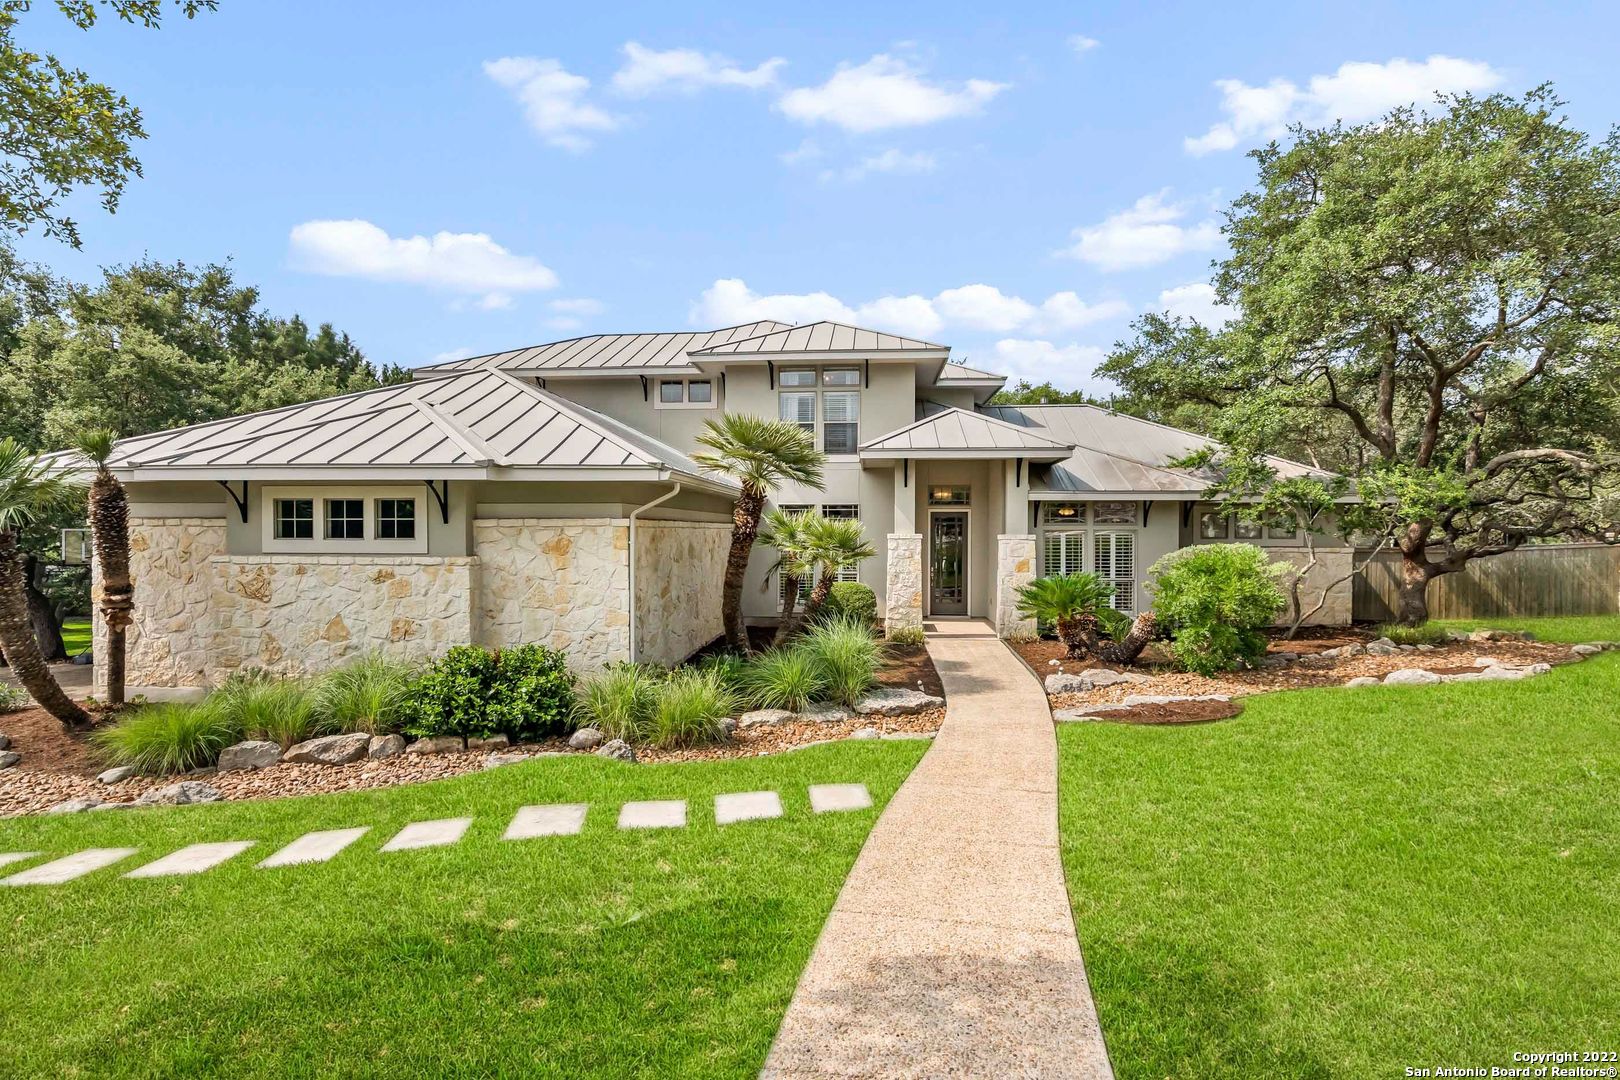 This luxury home perfectly marries gorgeous design elements with a fantastic location. Tucked away on a large lot in Village Green with plentiful oak trees, owners will enjoy access to highly rated Boerne schools with all of the conveniences of San Antonio just a short drive away. Guests are immediately welcomed by this home's timeless curb appeal and lush landscaping. Inside, high-end details include vaulted ceilings, custom crown molding, hardwood and tile floors, plus limestone accents. Acting as the heart of this home is a beautifully updated kitchen which flows seamlessly into the warm and inviting family room. This culinary arena provides natural stone counters, subway tile backsplash, white cabinetry, gas cooktop, and an expansive island. Completing the first floor is a private study, formal and casual dining areas, plus a luxe owner's suite with private bath, tray ceiling, and patio access. Upstairs are three nicely sized secondary bedrooms and two full baths centered around a loft-style game room. This listing also boasts a three-car garage and fantastic back yard that features a sprawling covered patio, multi-level deck, fire pit, playscape, and refreshing pool.